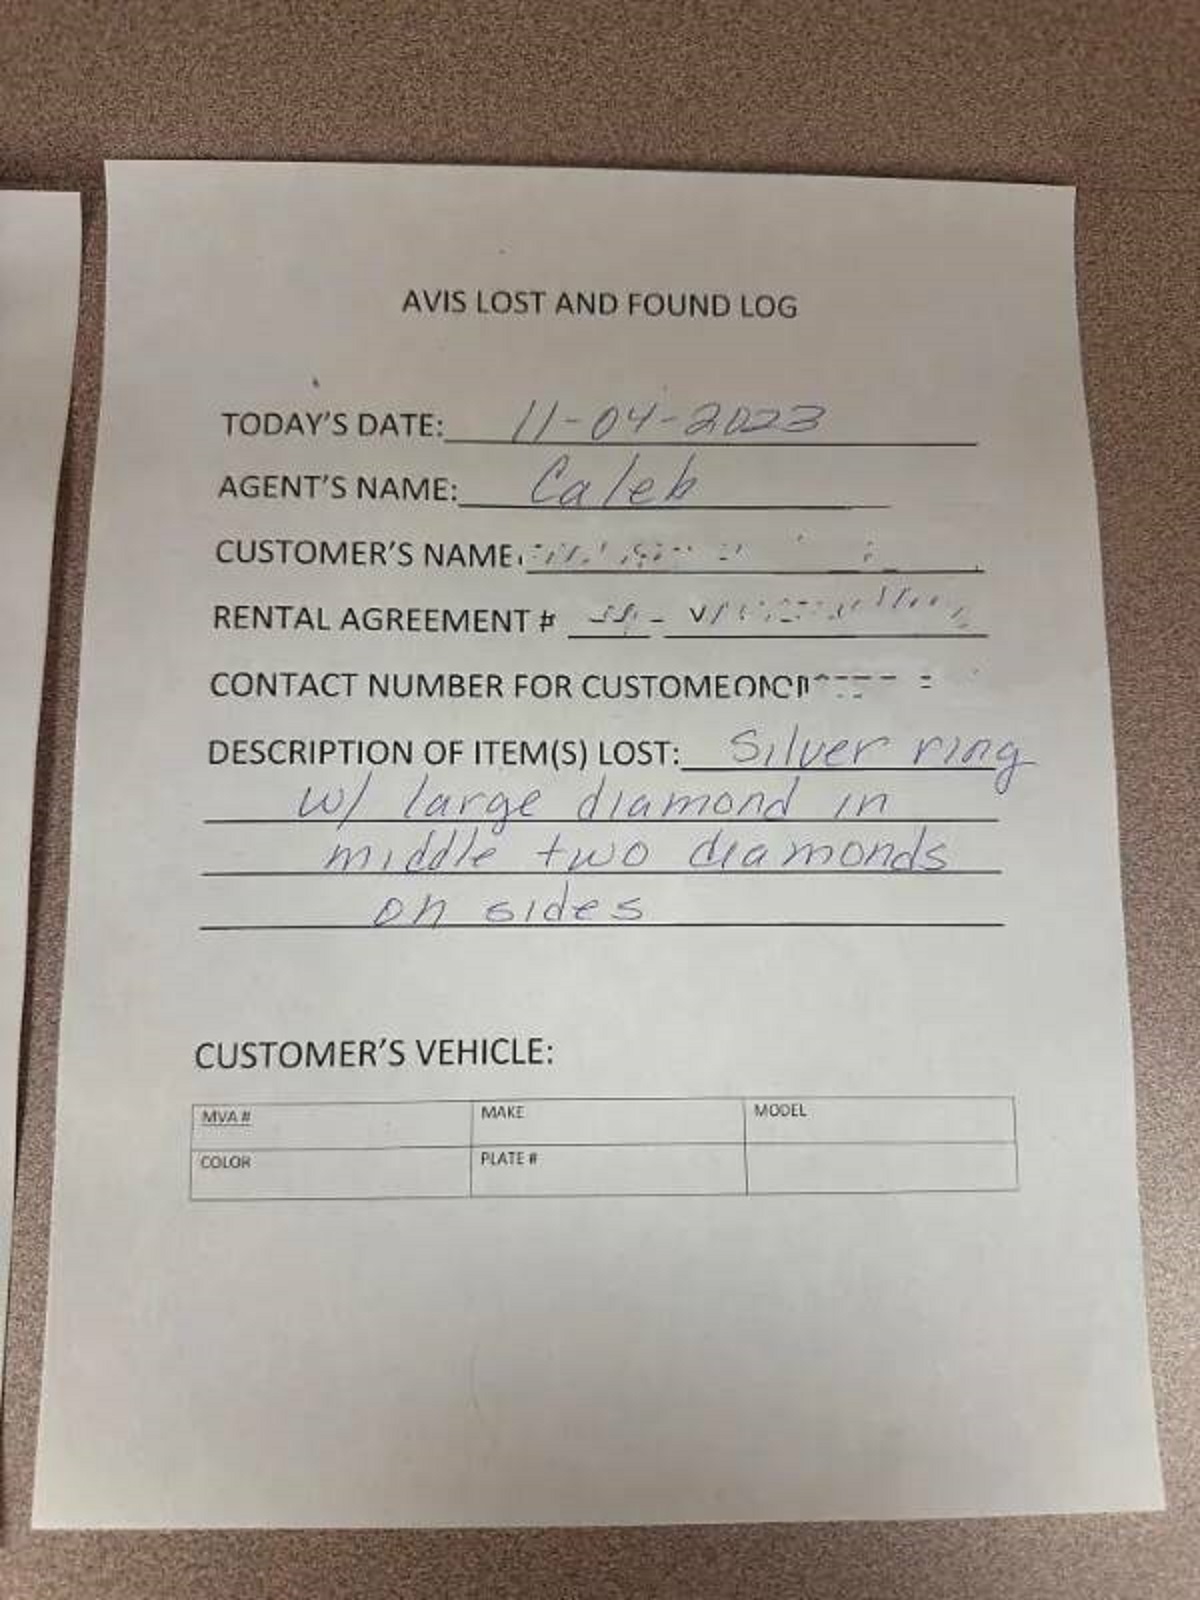 “This customer who lost a diamond ring in a rental car. No we didn’t find it.”